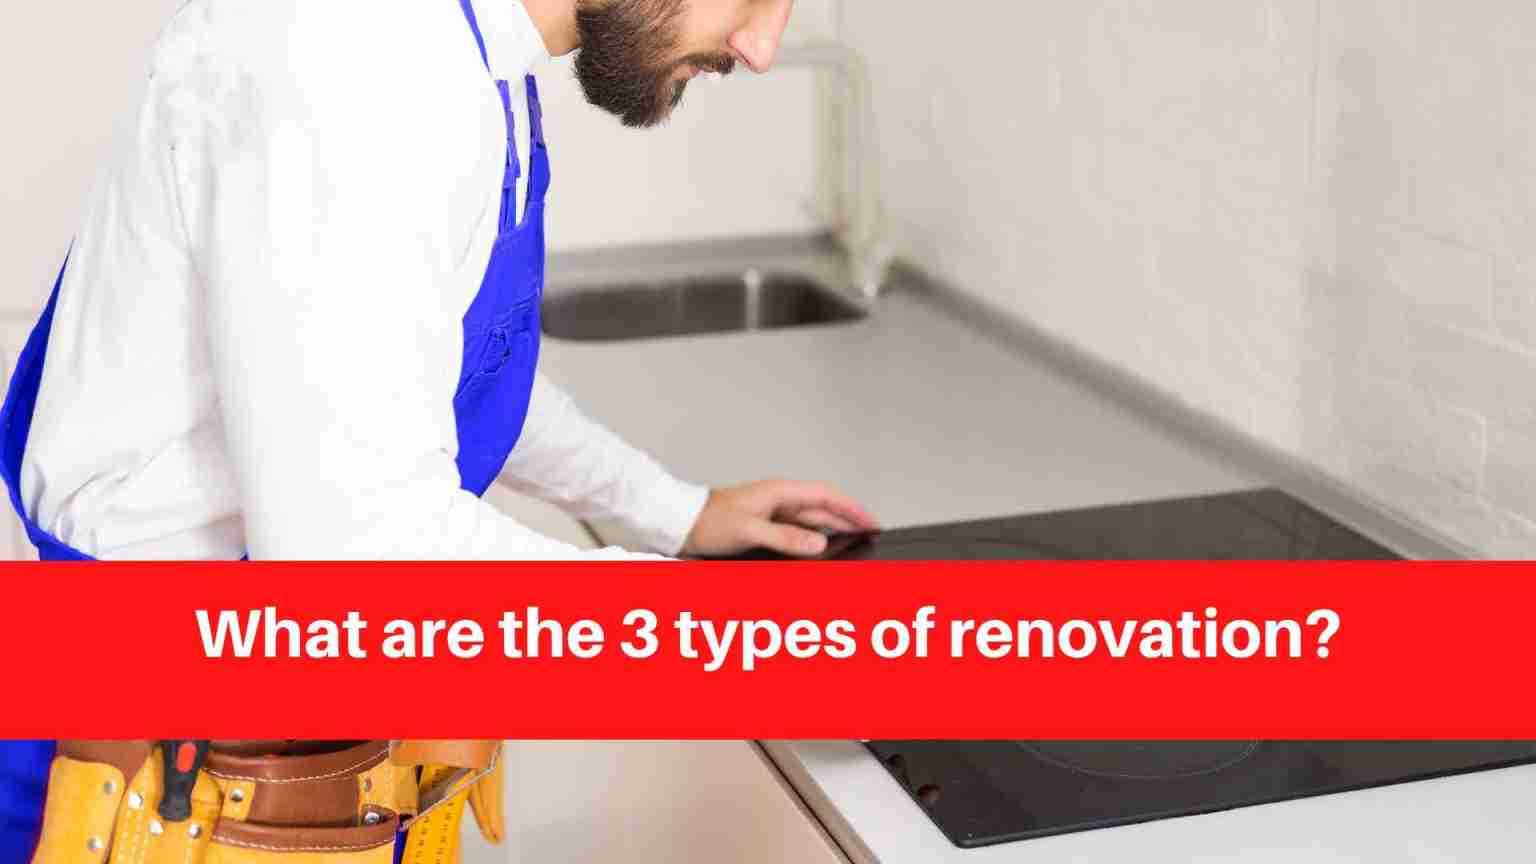 What are the 3 types of renovation